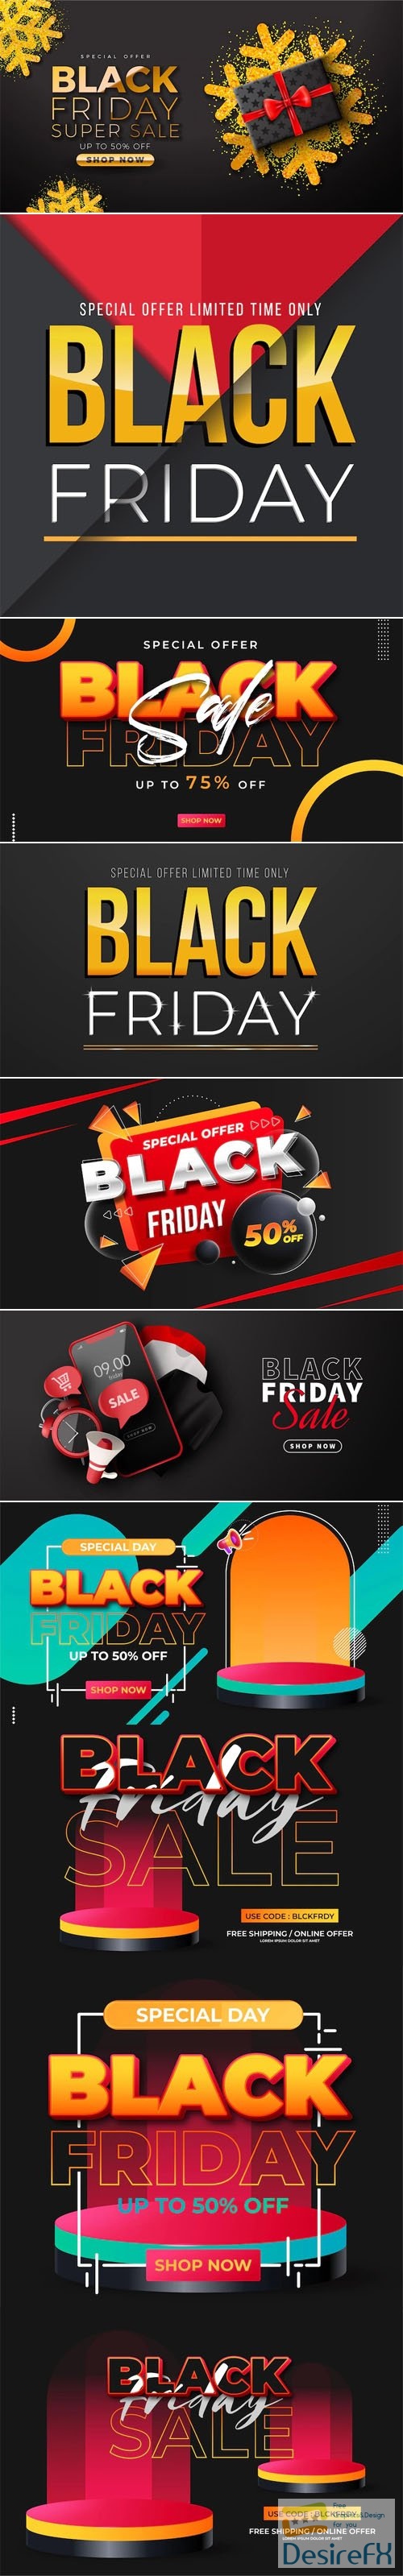 Black Friday - 10 Banners & Backgrounds Vector Templates